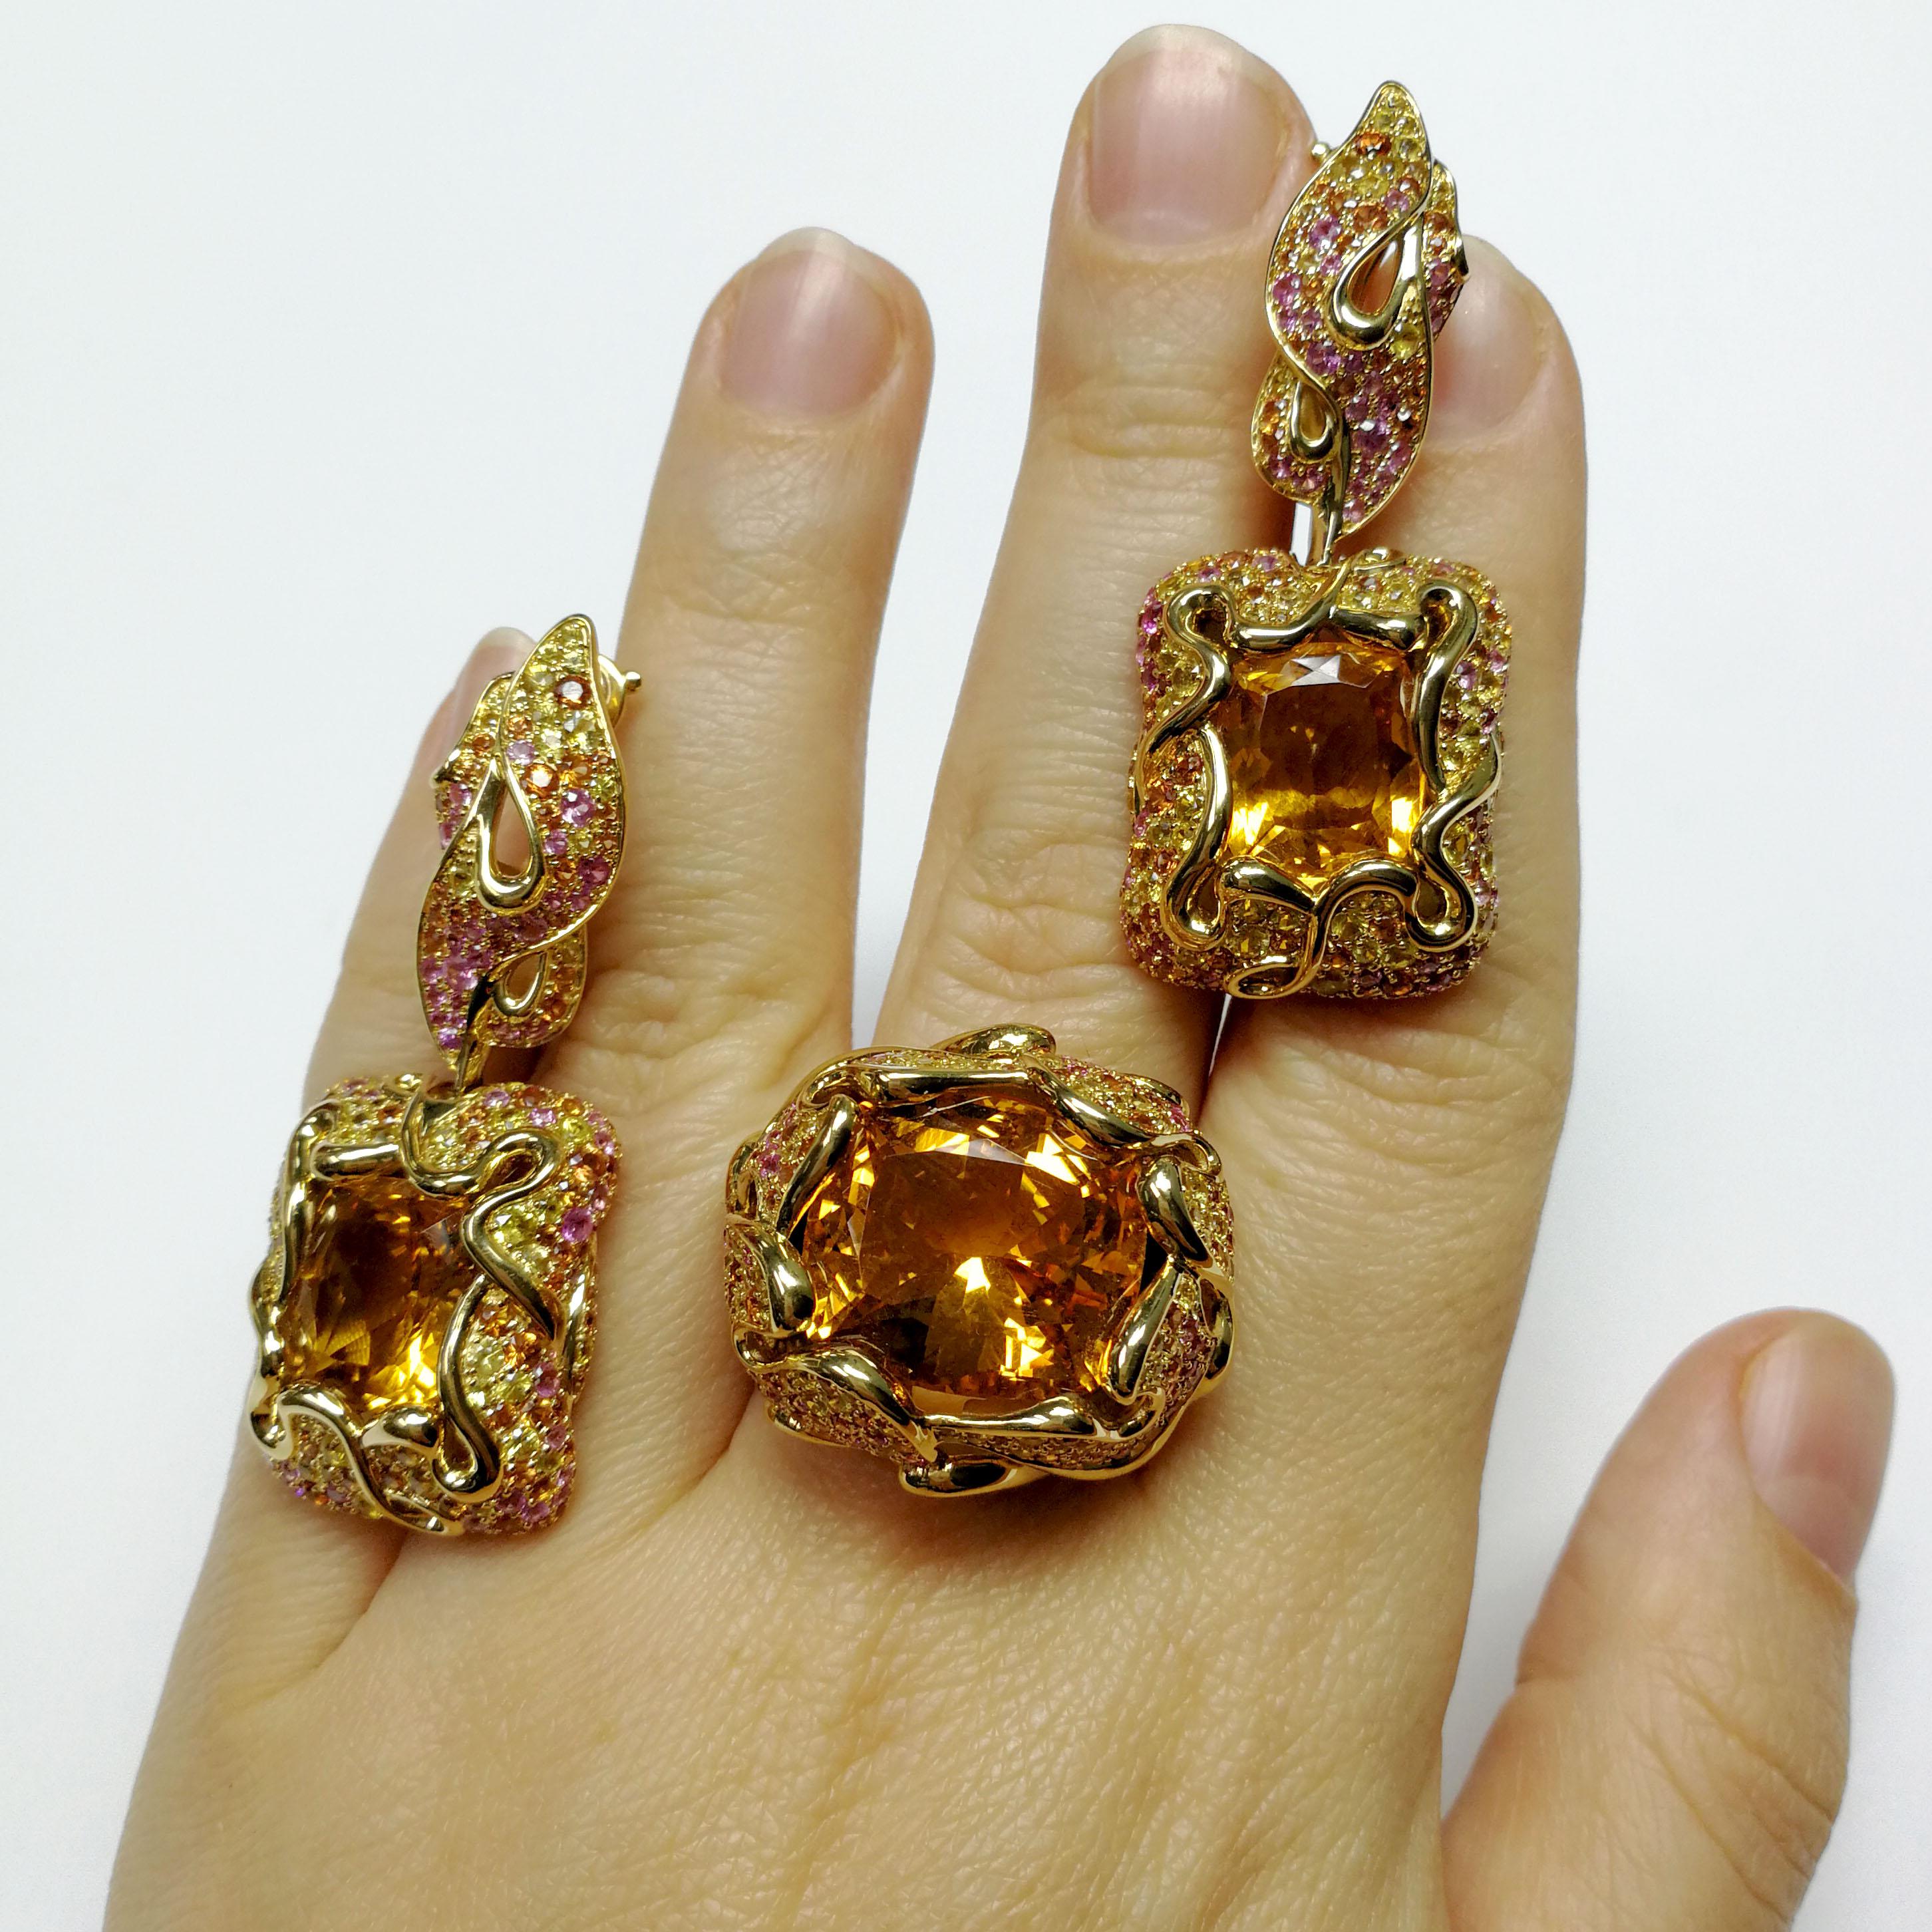 Citrine Pink Yellow Orange Sapphire 18 Karat Yellow Gold Suite
In early June in the gardens bloom luxurious flowers - peonies. Romance and mystery of peonies always attracted and allured artists. Our designers created this Ring, inspired by this